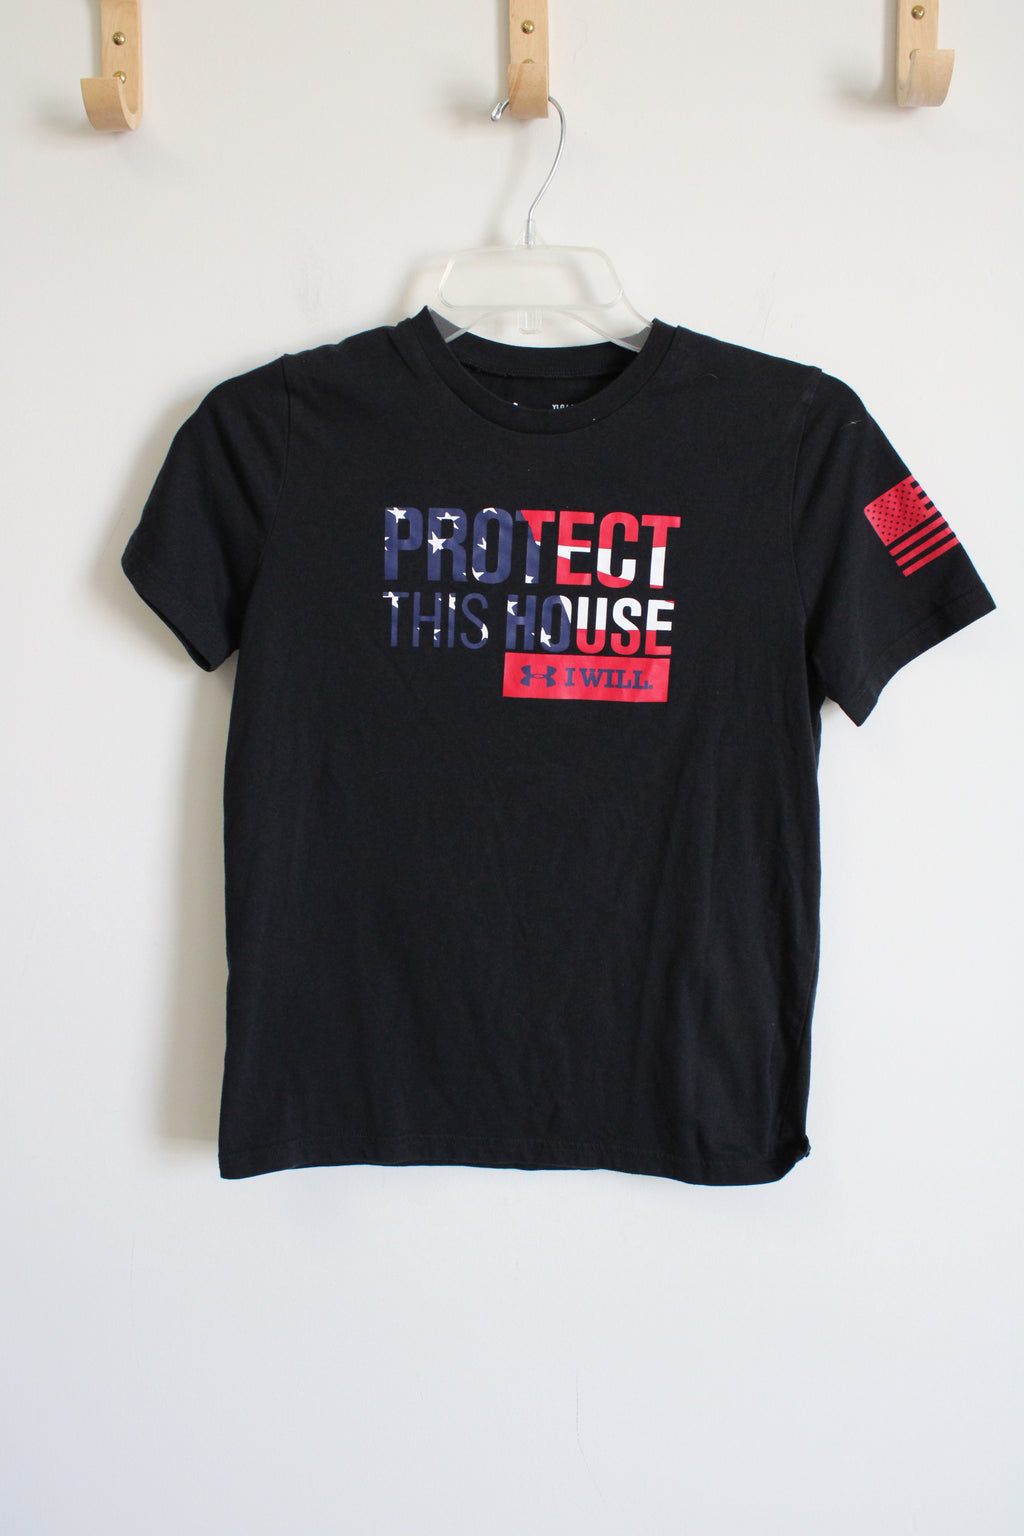 Under Armour Protect This House Black Tee | Youth L (14/16)